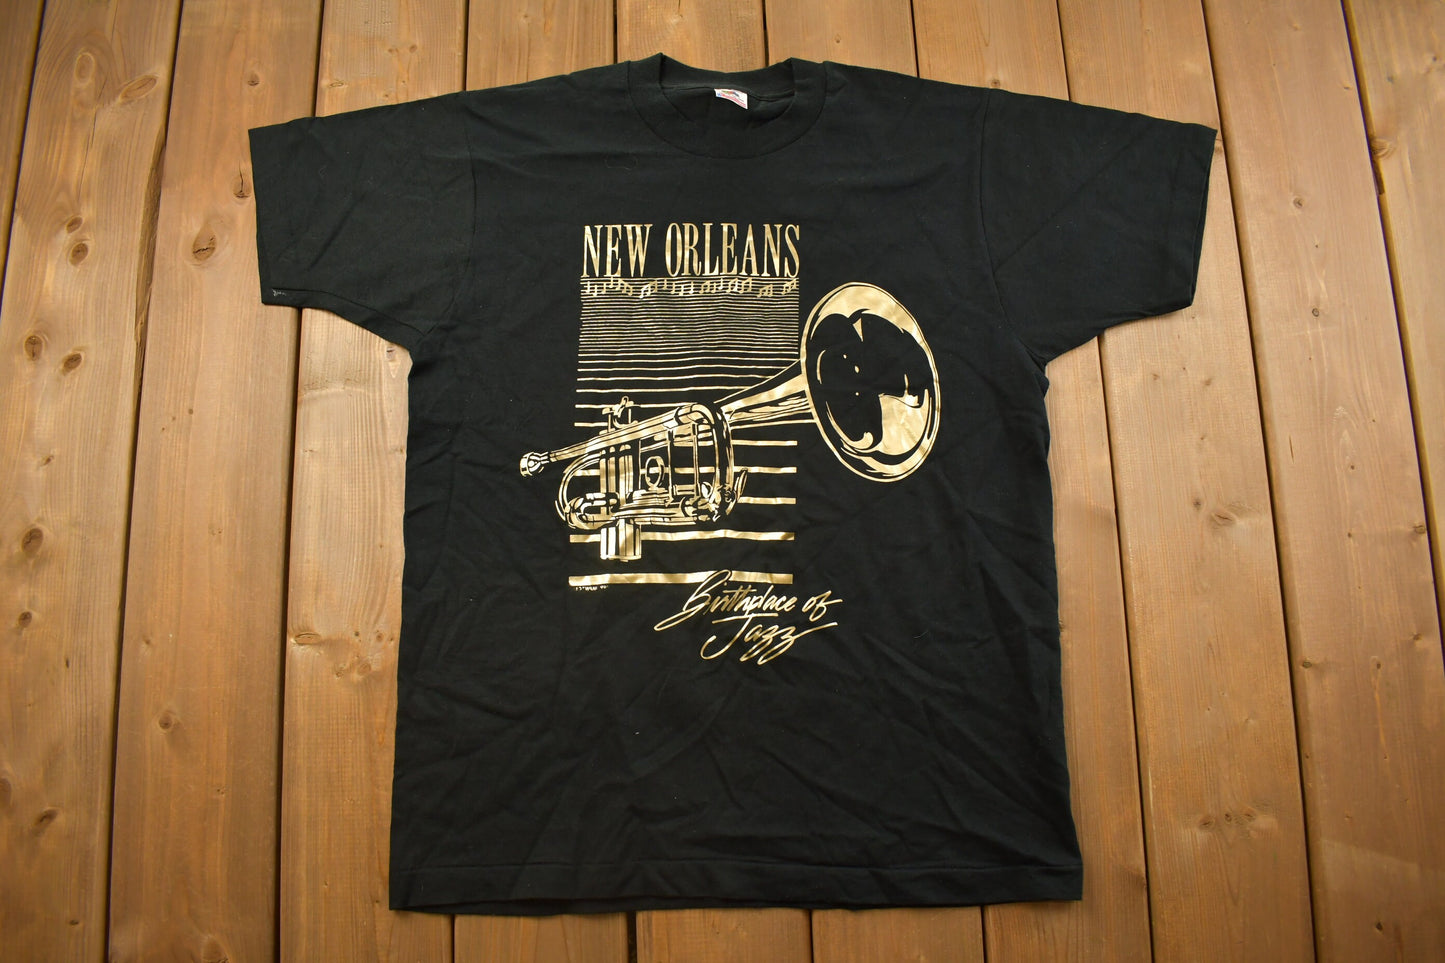 Vintage 1990s New Orleans &quot;Birthplace Of Jazz&quot; T-Shirt / 90s / Streetwear Fashion / Made In USA /Vacation Tee/Travel & Tourism/Single Stitch